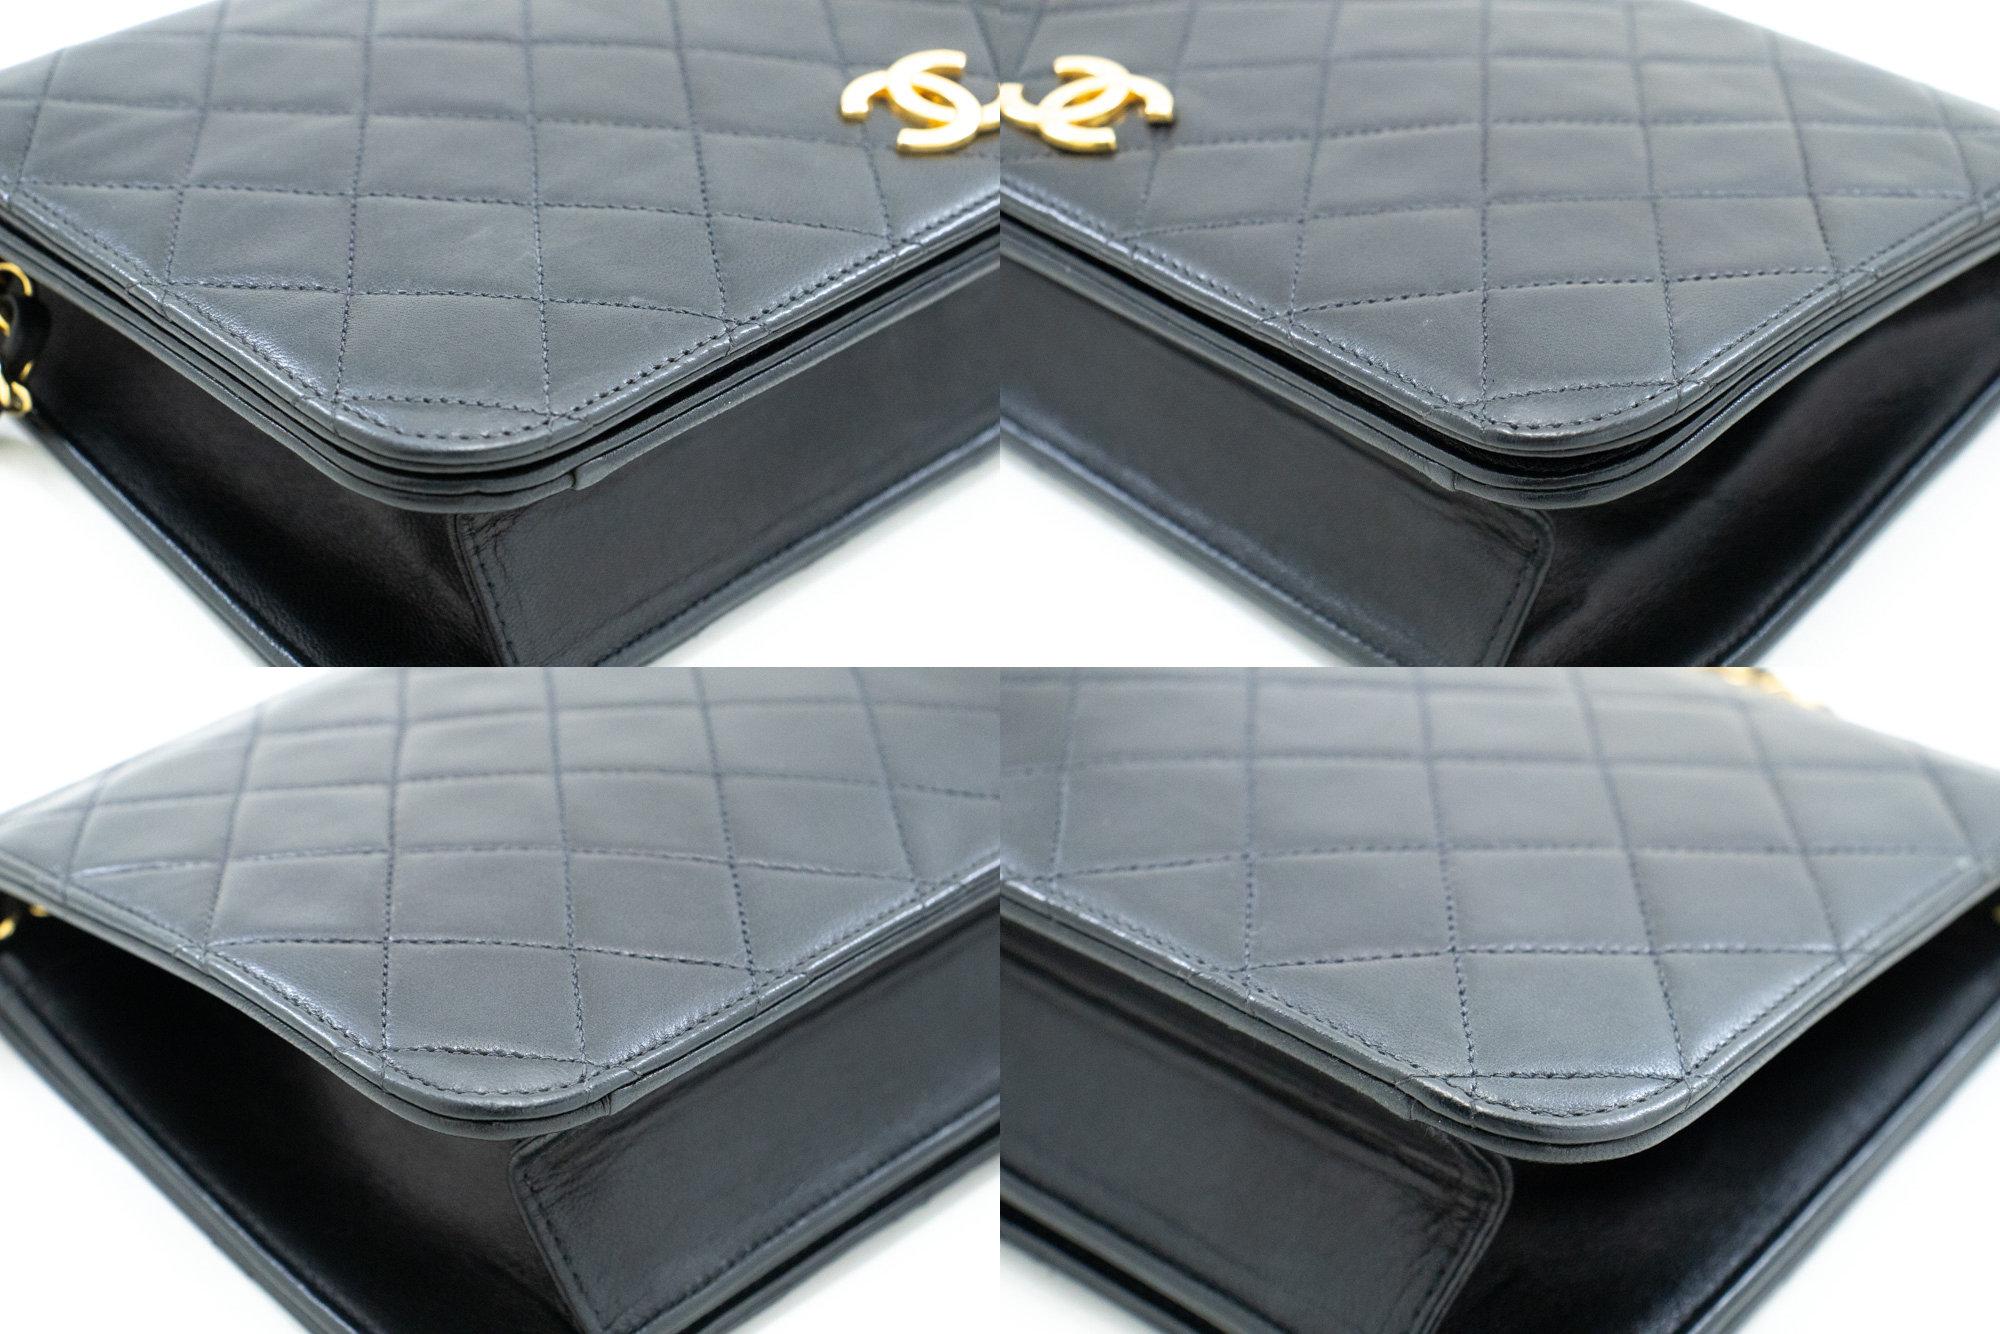 CHANEL Full Chain Flap Shoulder Bag Black Clutch Quilted Lambskin For Sale 1